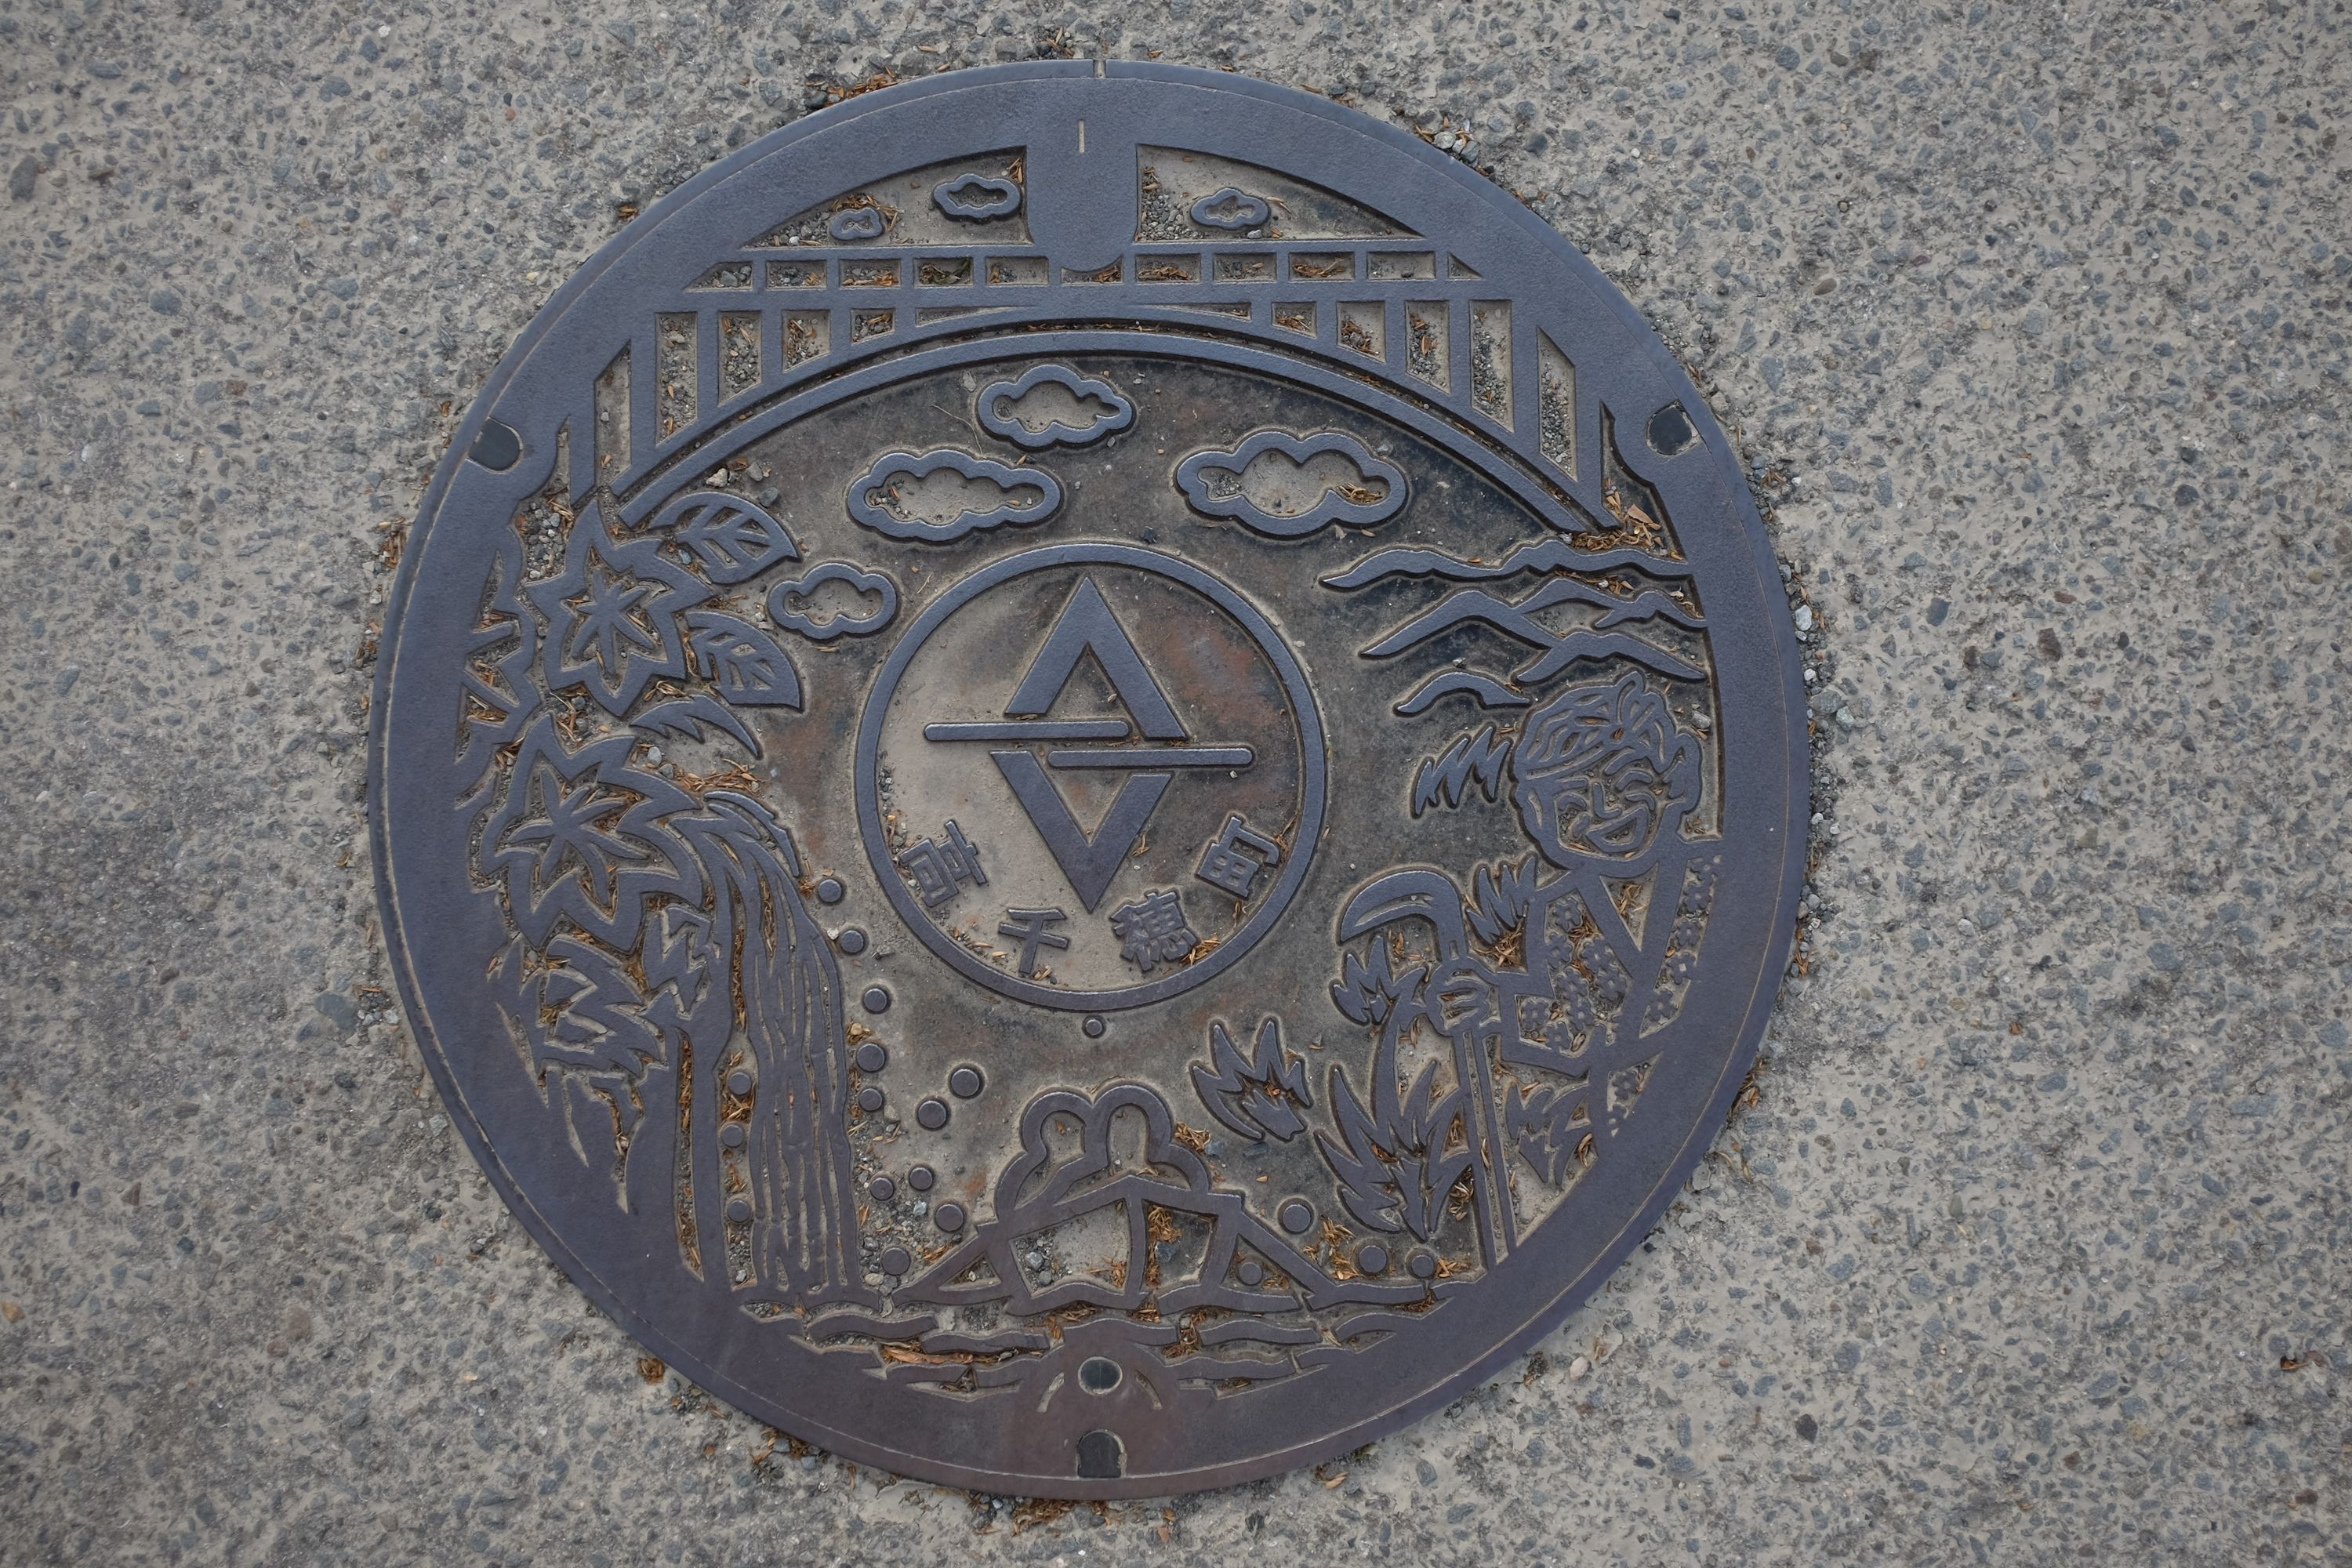 A manhole cover shows one of the boats in the gorge.